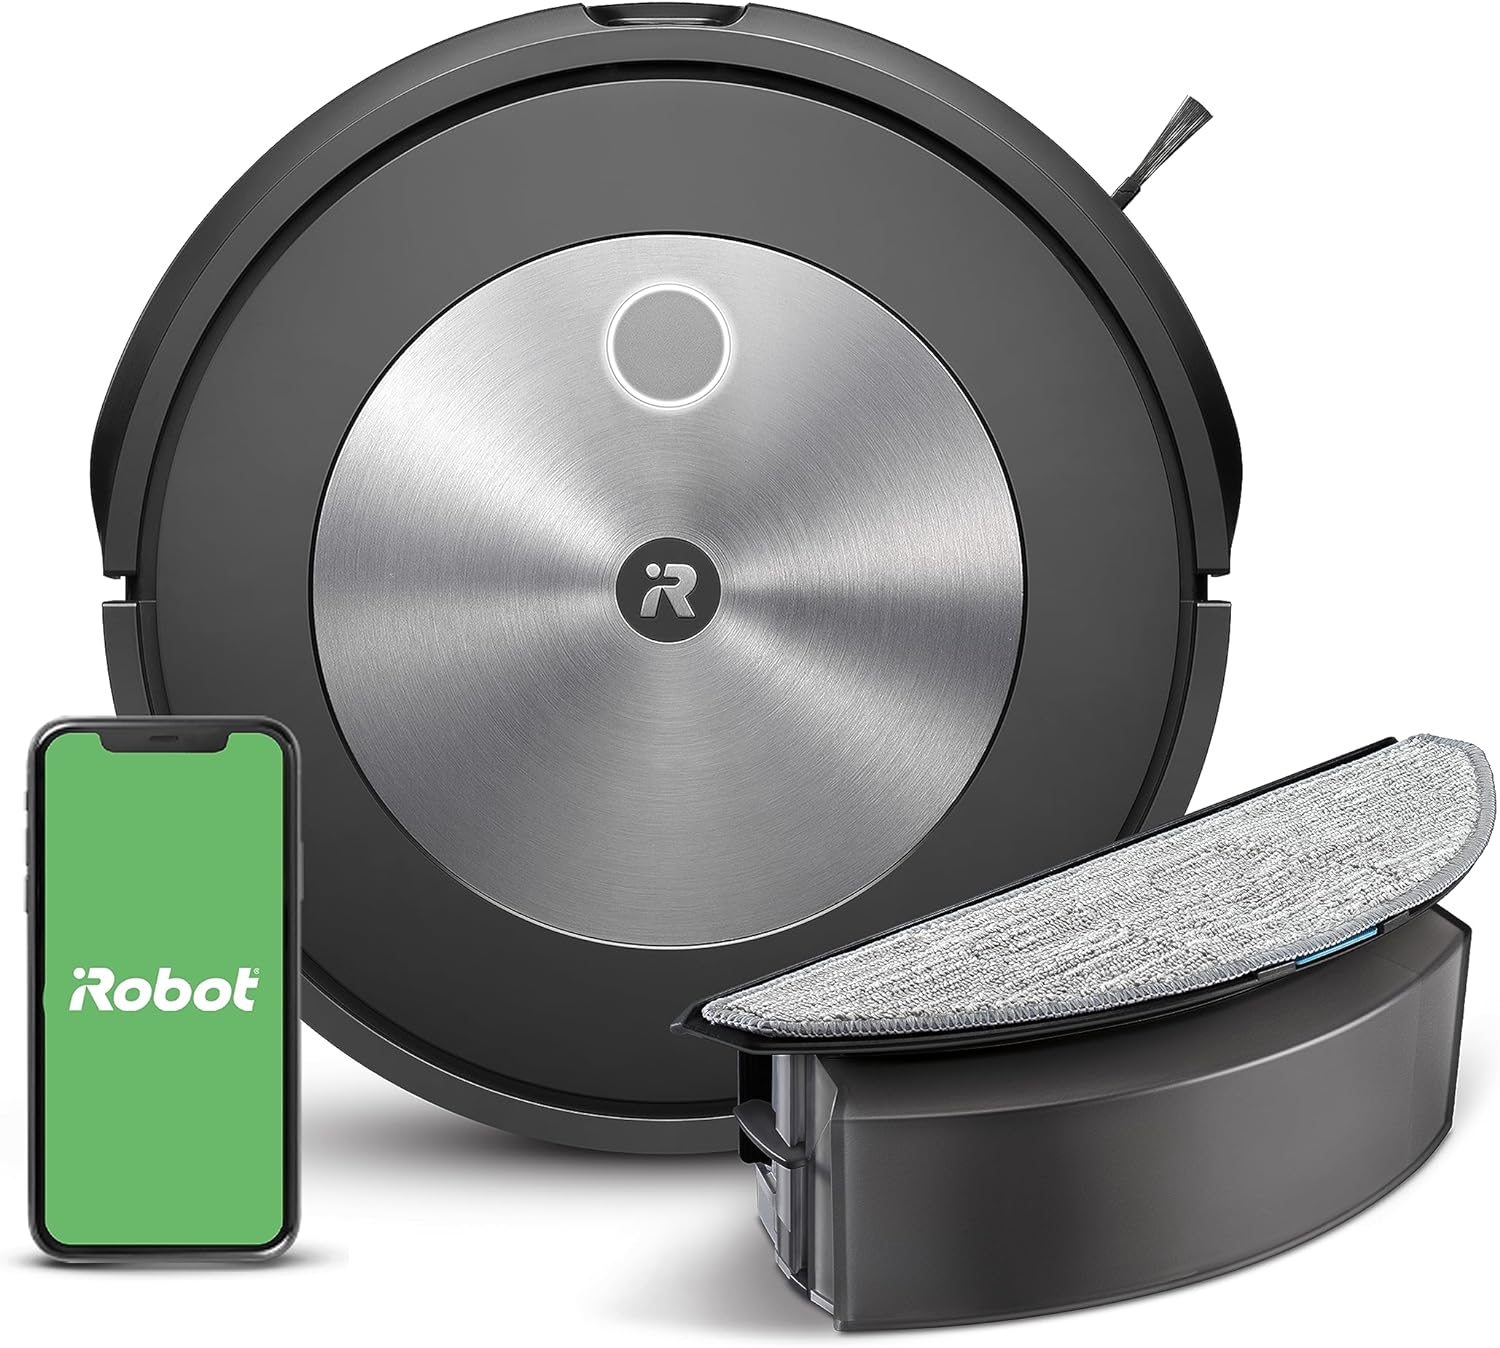  iRobot® Authentic Replacement Parts- Roomba® s Series  Replenishment Kit, (3 Filters, 3 Corner Brushes, 1 Set of Multi-Surface  Rubber Brushes)